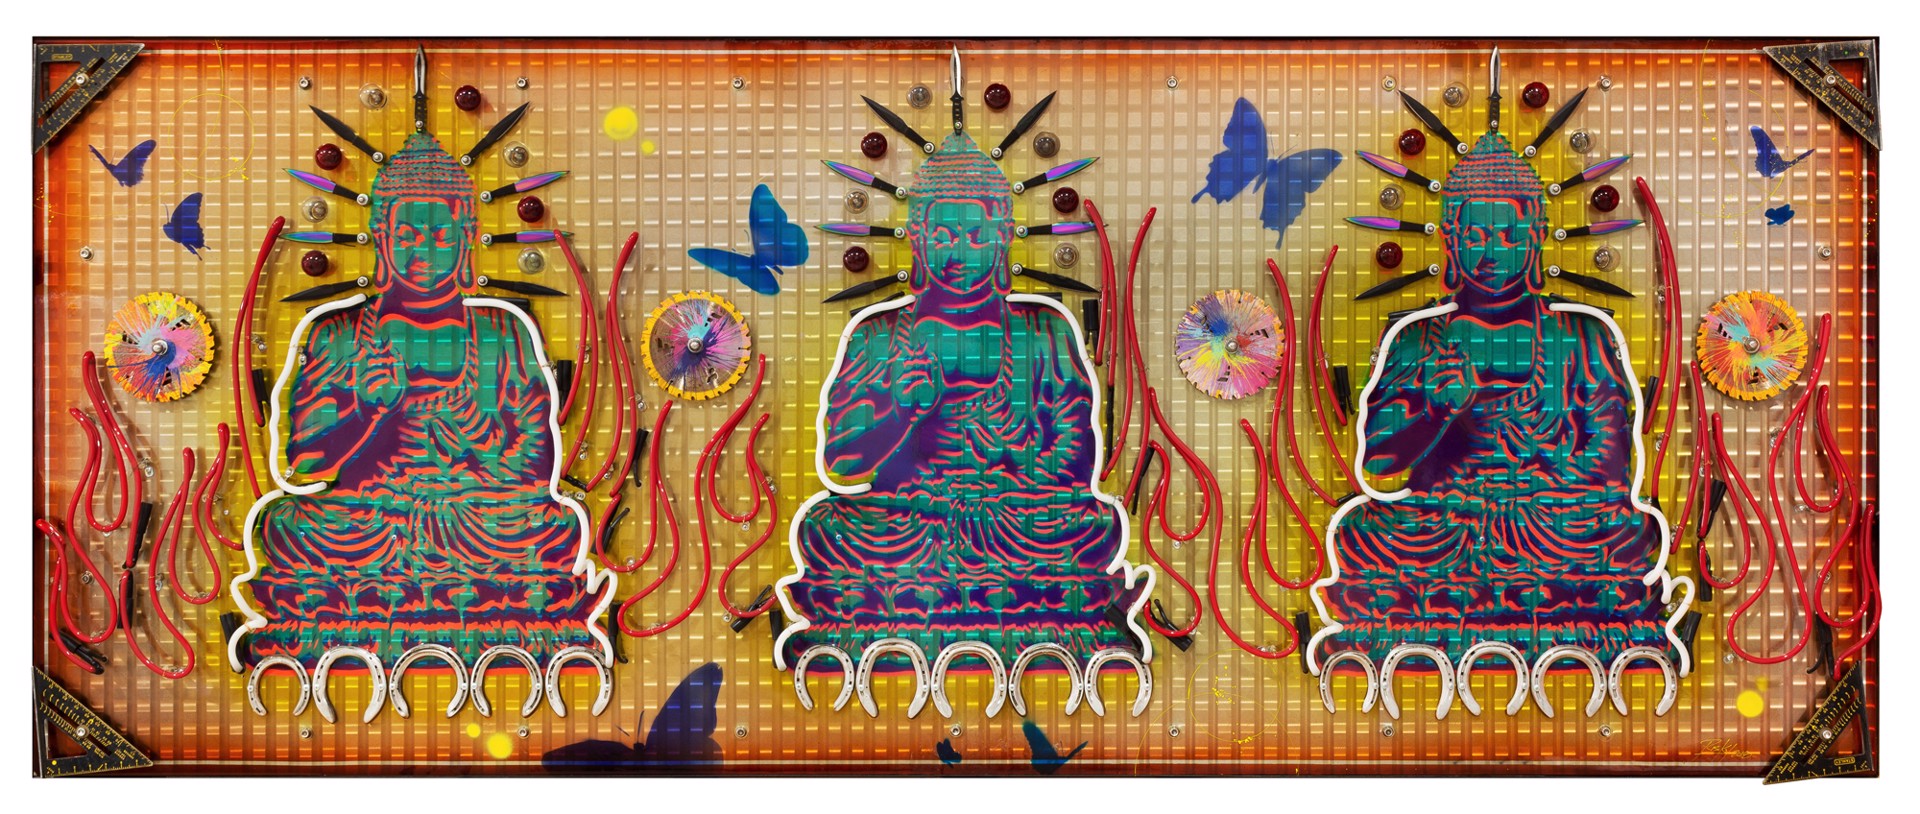 Peaceful Buddha with throwing knives Neon by Risk